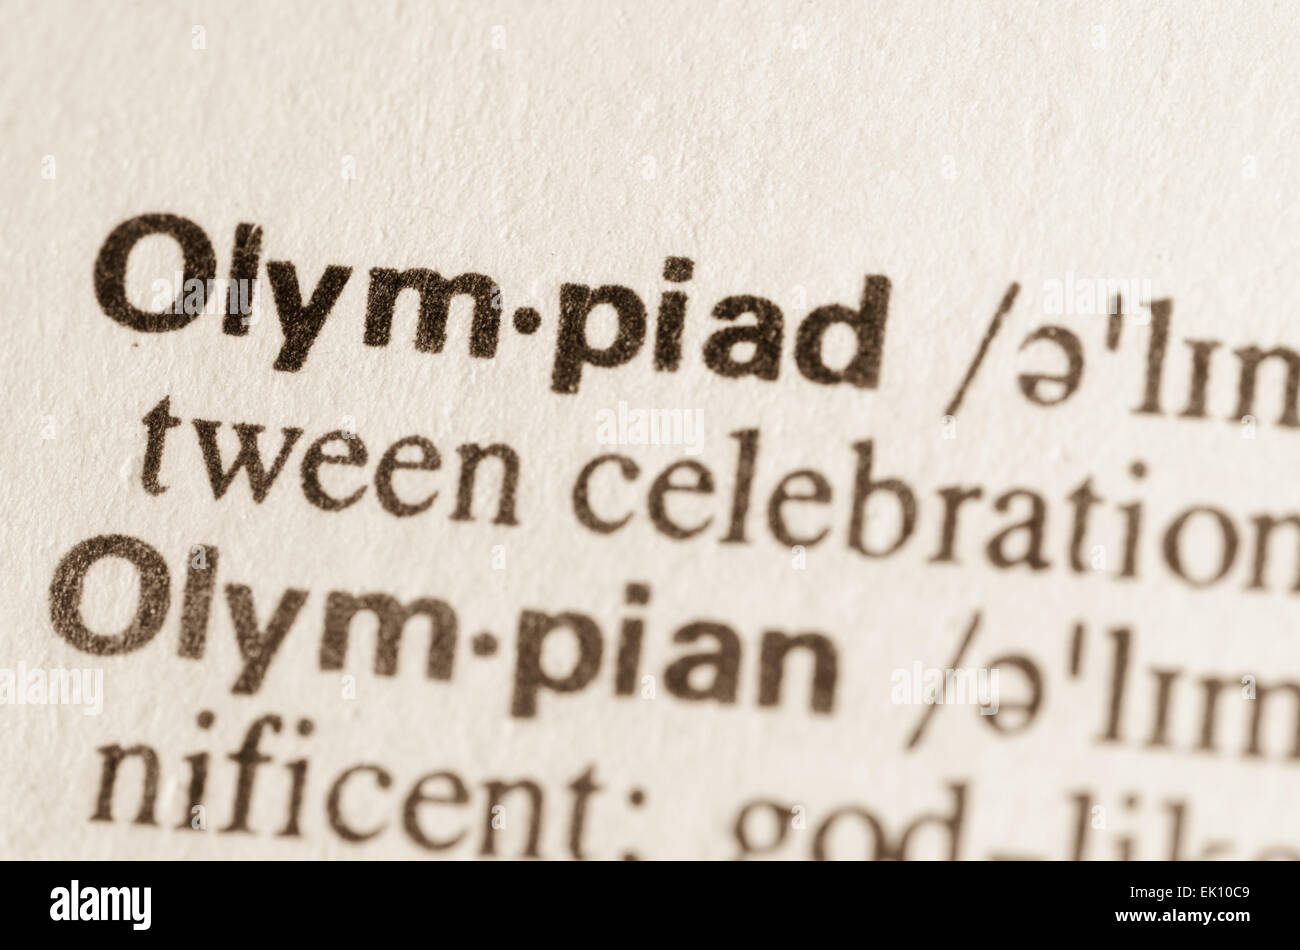 word Olympiad in dictionary Stock Photo